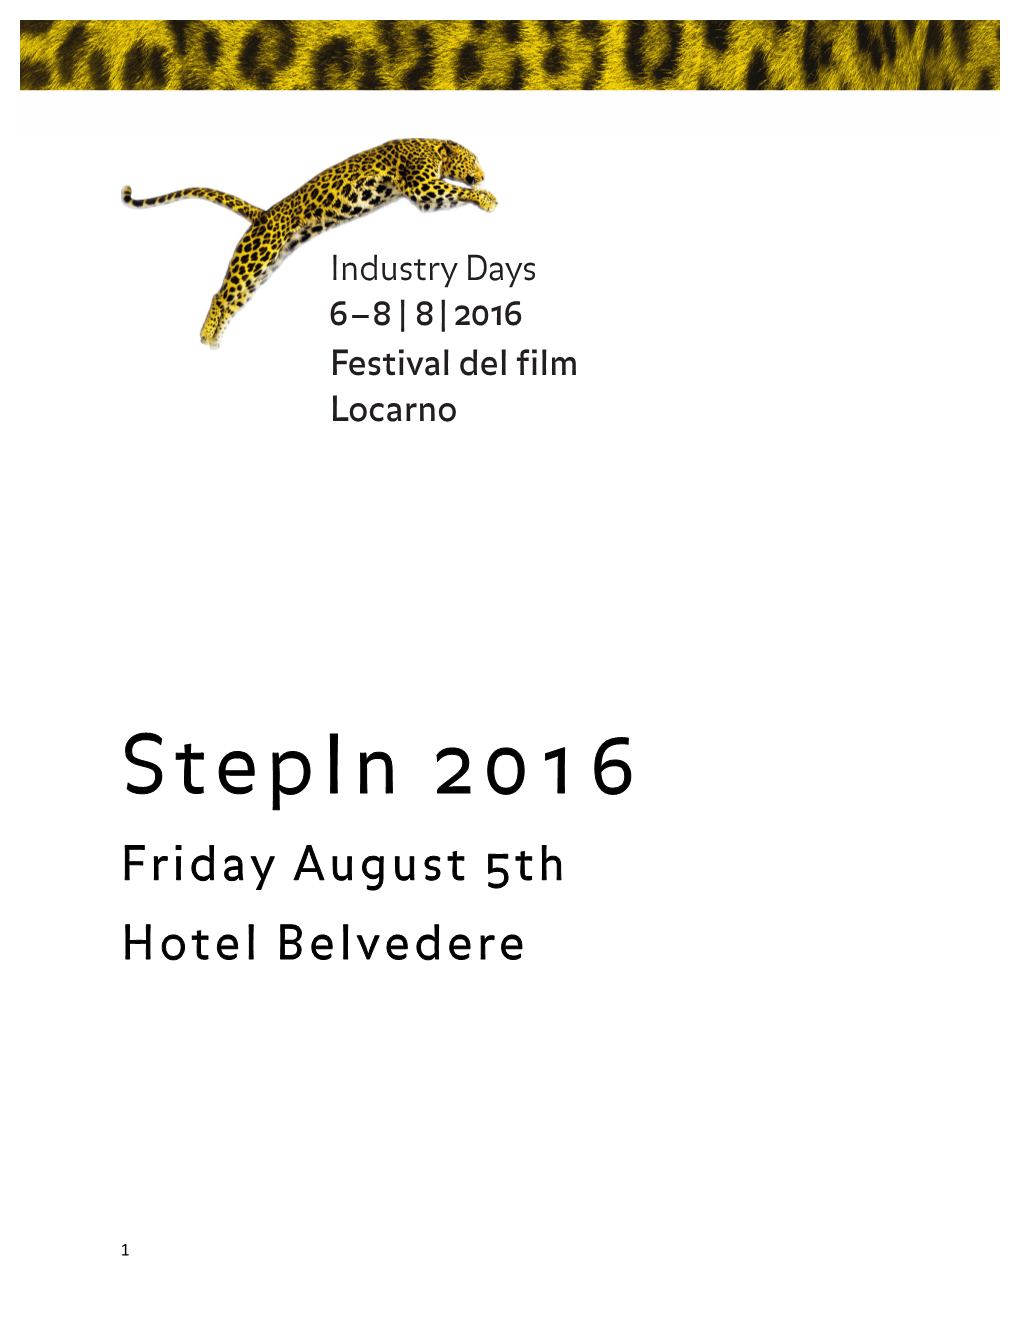 Stepin 2016 Friday August 5Th Hotel Belvedere